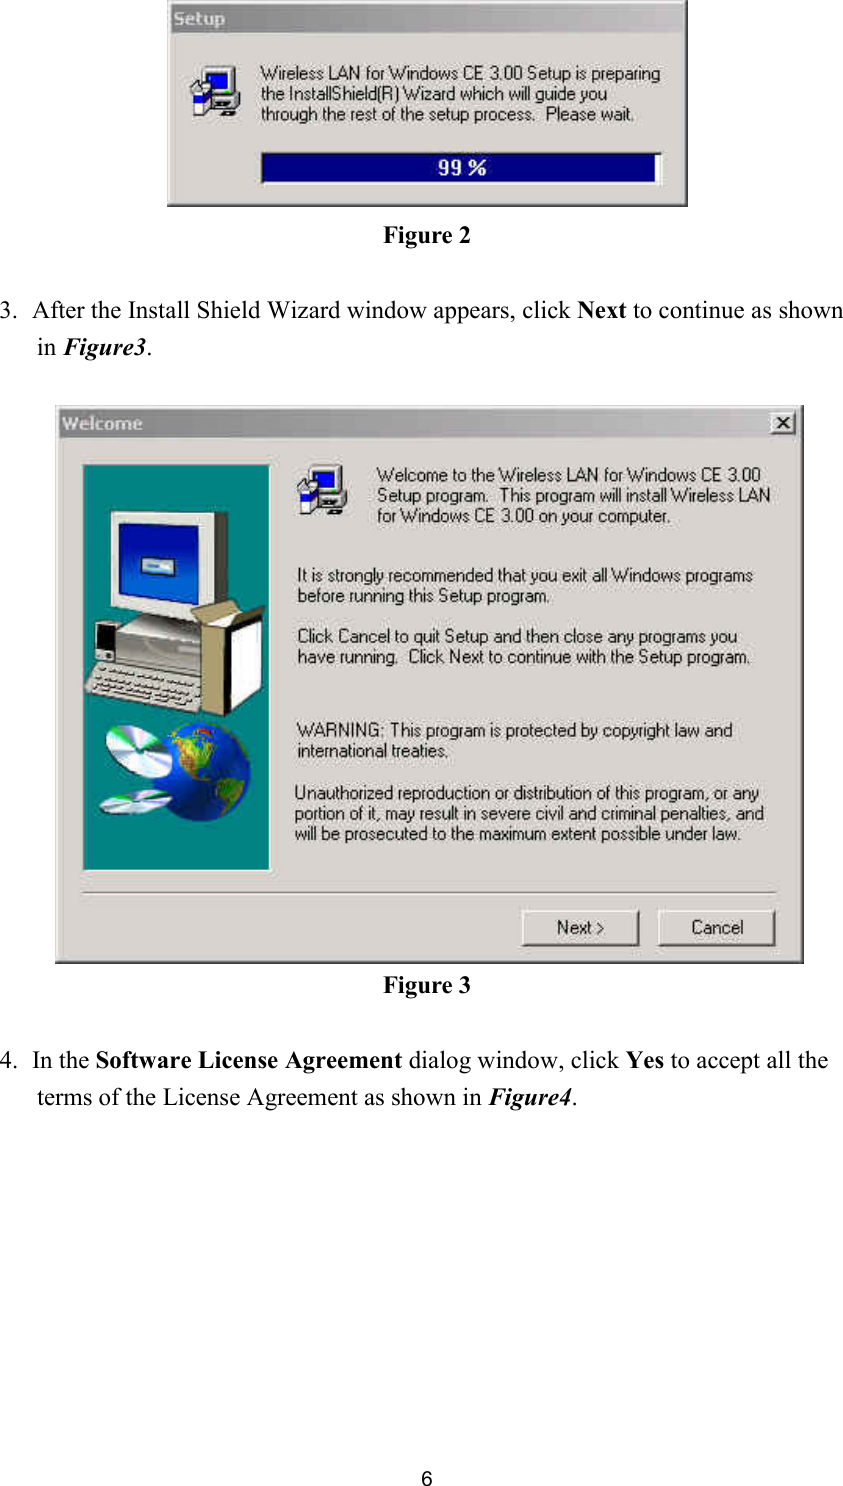  6 Figure 2  3. After the Install Shield Wizard window appears, click Next to continue as shown in Figure3.   Figure 3  4. In the Software License Agreement dialog window, click Yes to accept all the terms of the License Agreement as shown in Figure4.  